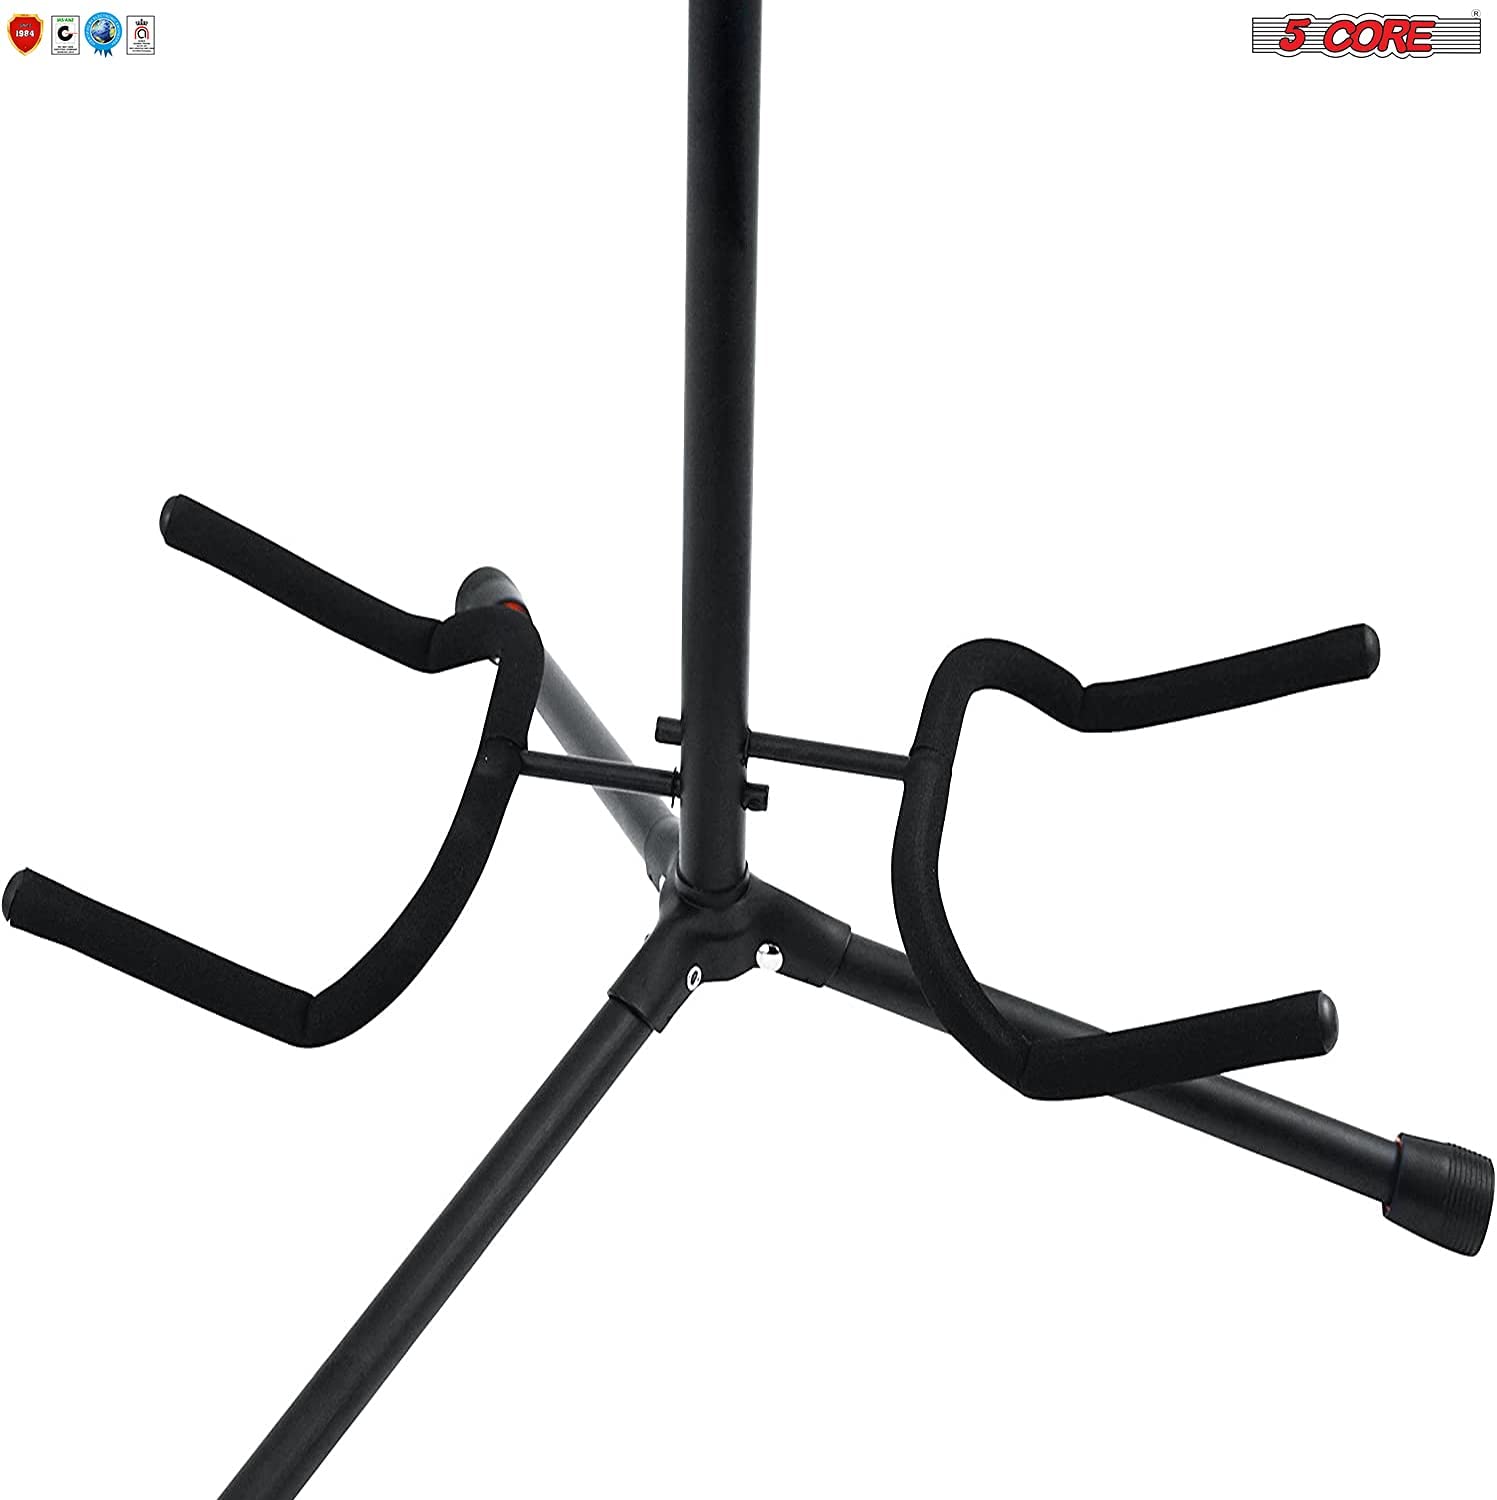 5 Core Guitar Stand 1 Piece Black Multi Guitar Stands Floor Metal Acoustic Bass Electric Guitar Stand With Soft Padding And Neck Rest Holds 2 Guitars Together - GSH 2N1